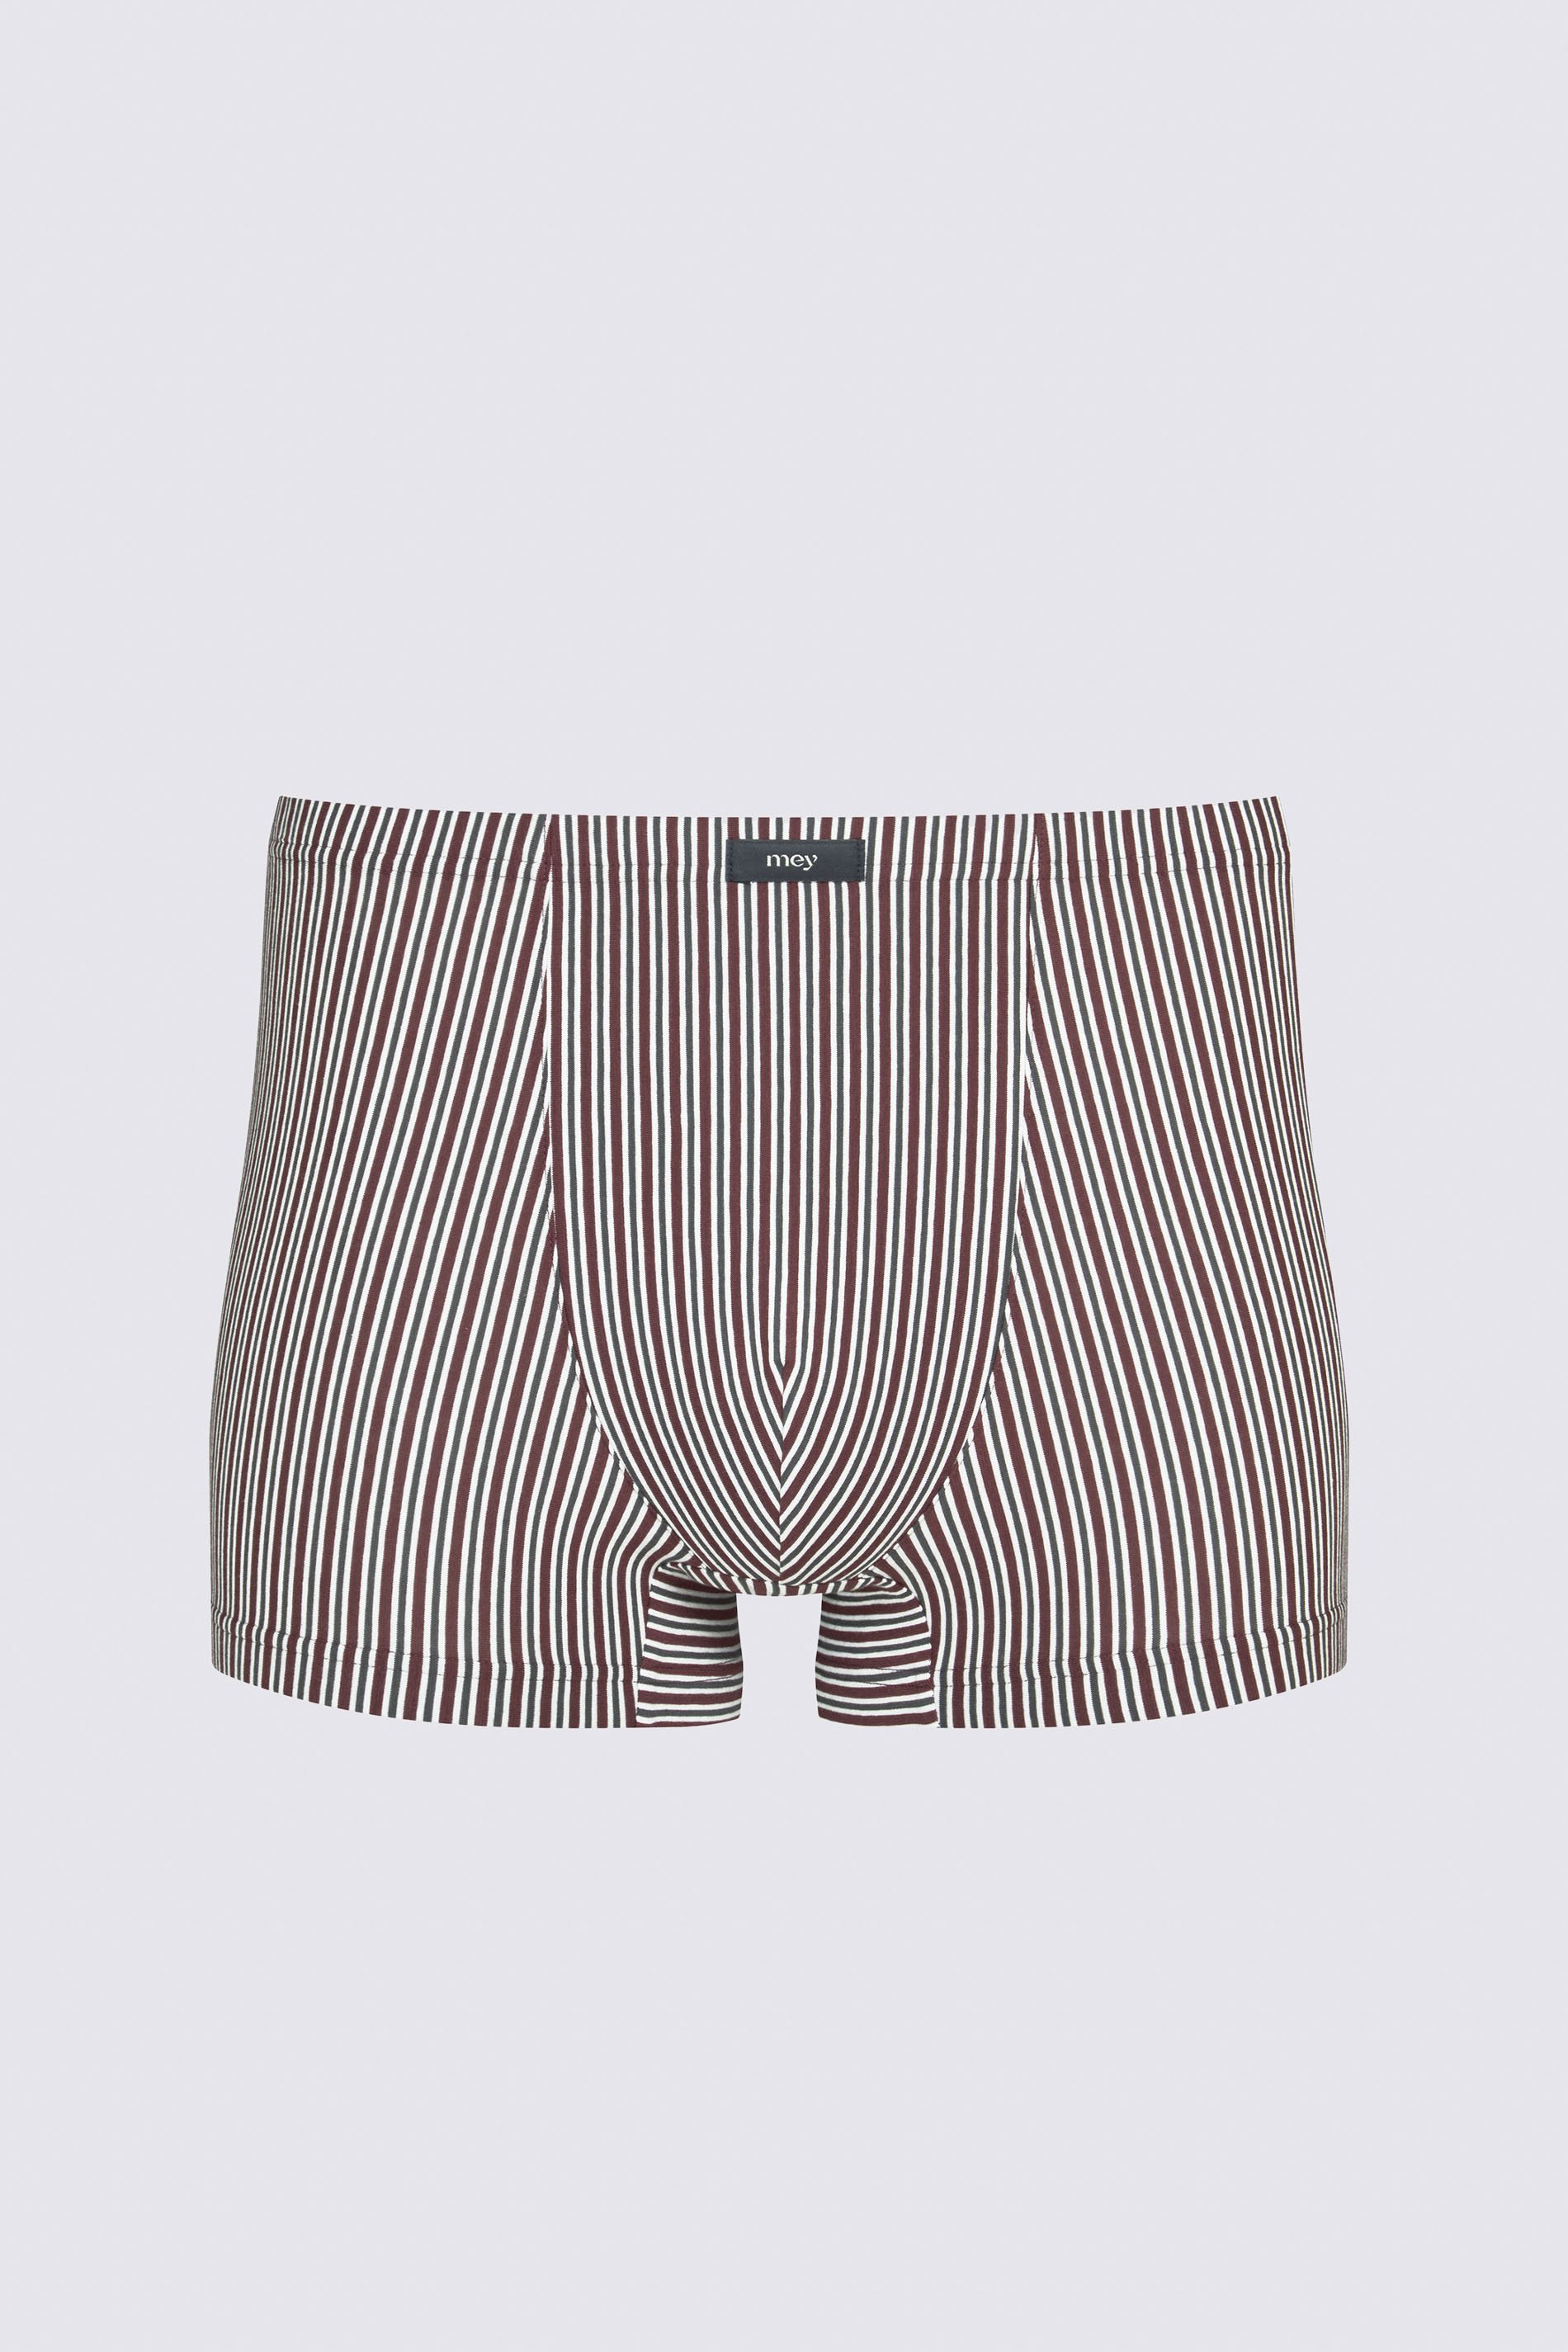 Shorty Oxblood Serie 3 Col Stripes Uitknippen | mey®